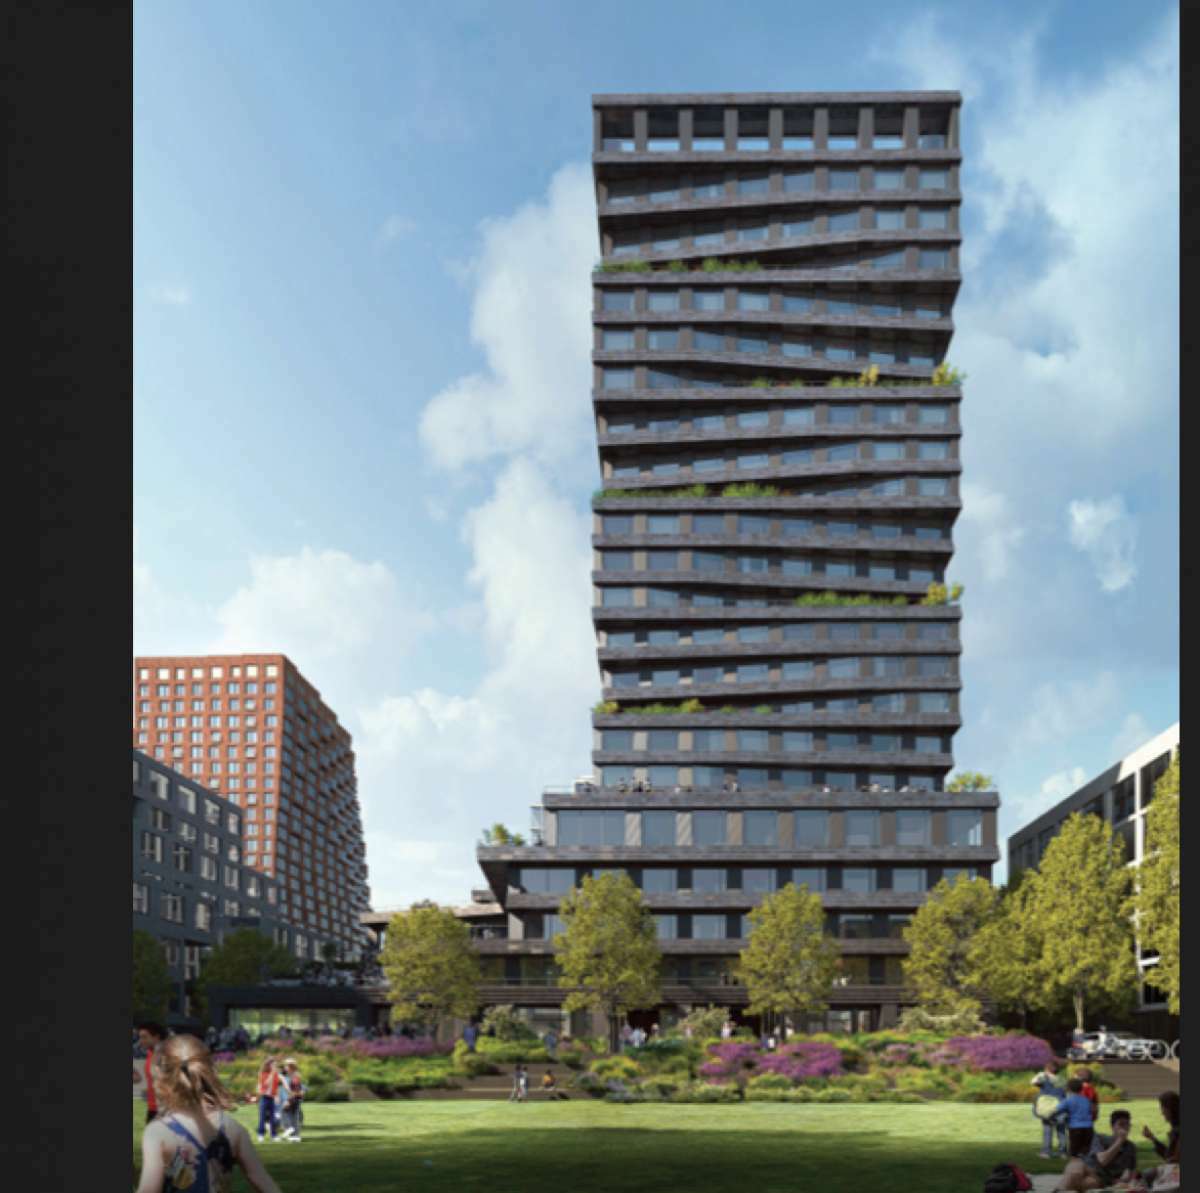 A rendering of the residential tower that Studio Gang has designed for the first phase of the Mission Rock project that is being developed by Tishman Speyer and the San Francisco Giants baseball team. In the foreground is a plaza that will be within the new 28-acre district.